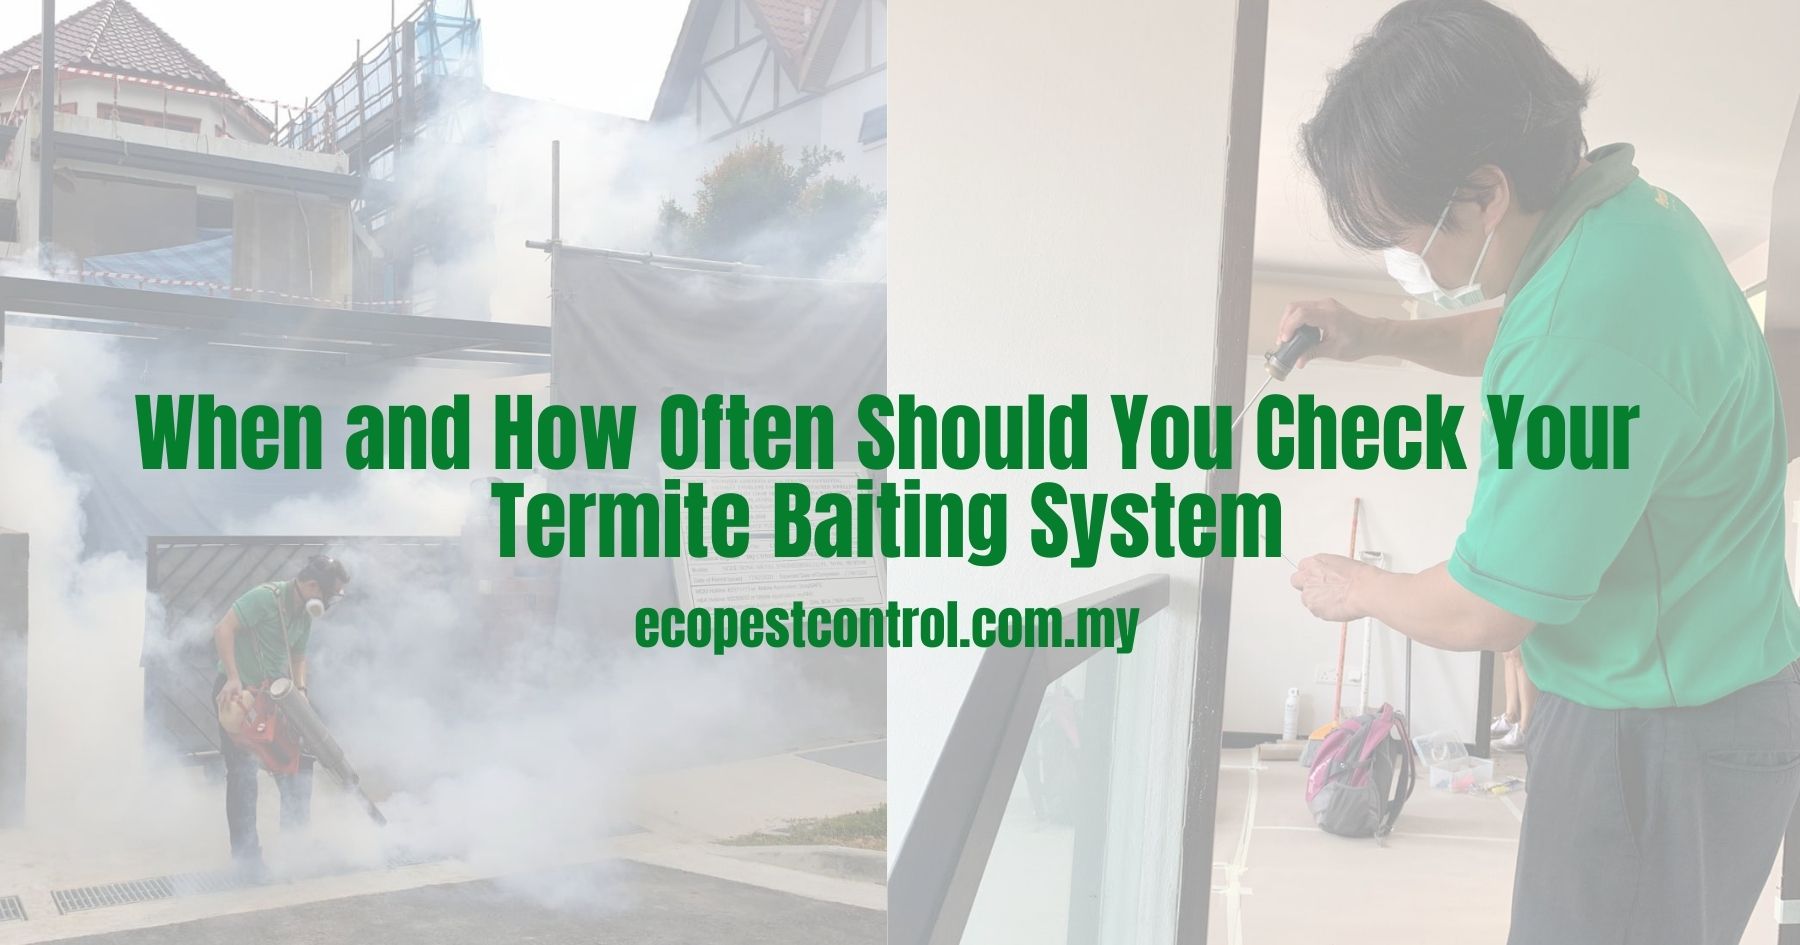 When and How Often Should You Check Your Termite Baiting System